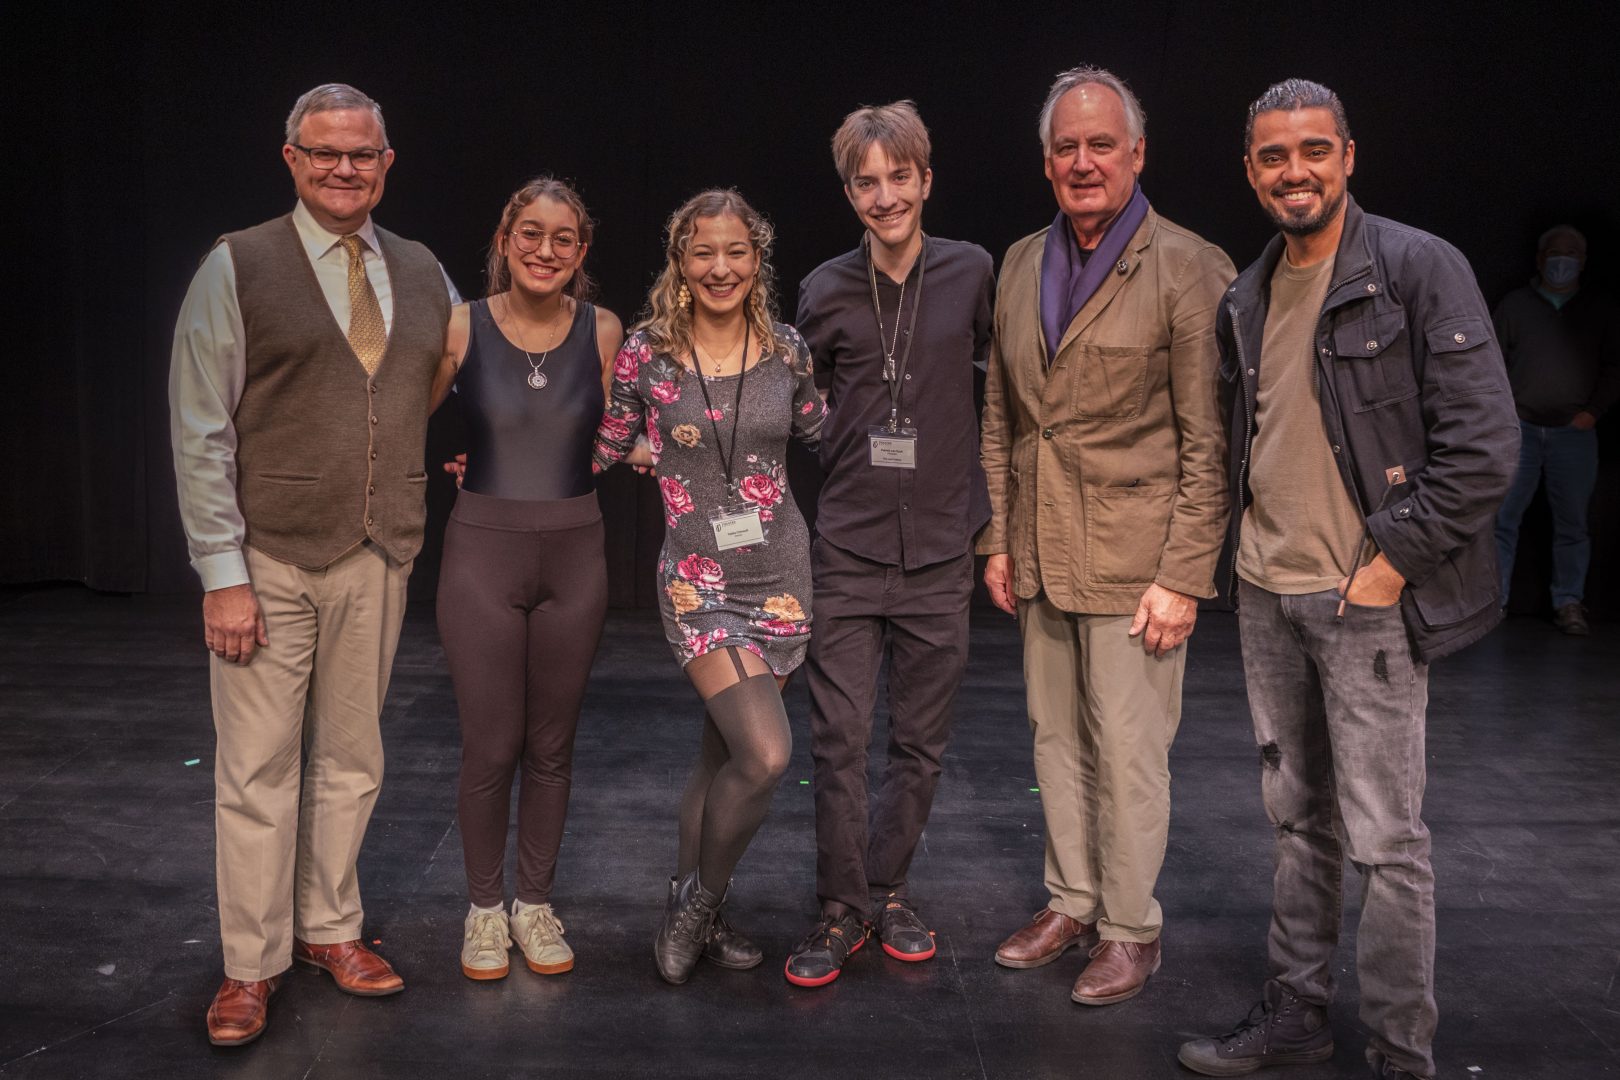 THE LAST COLONY—Tony Boothby, Katherine Carnes, director Tahlia Chinault, playwright Peter van Eyck, Tom Aposporos, Michael Mendez. Van Eyck's play received the $500 Runner-up award.